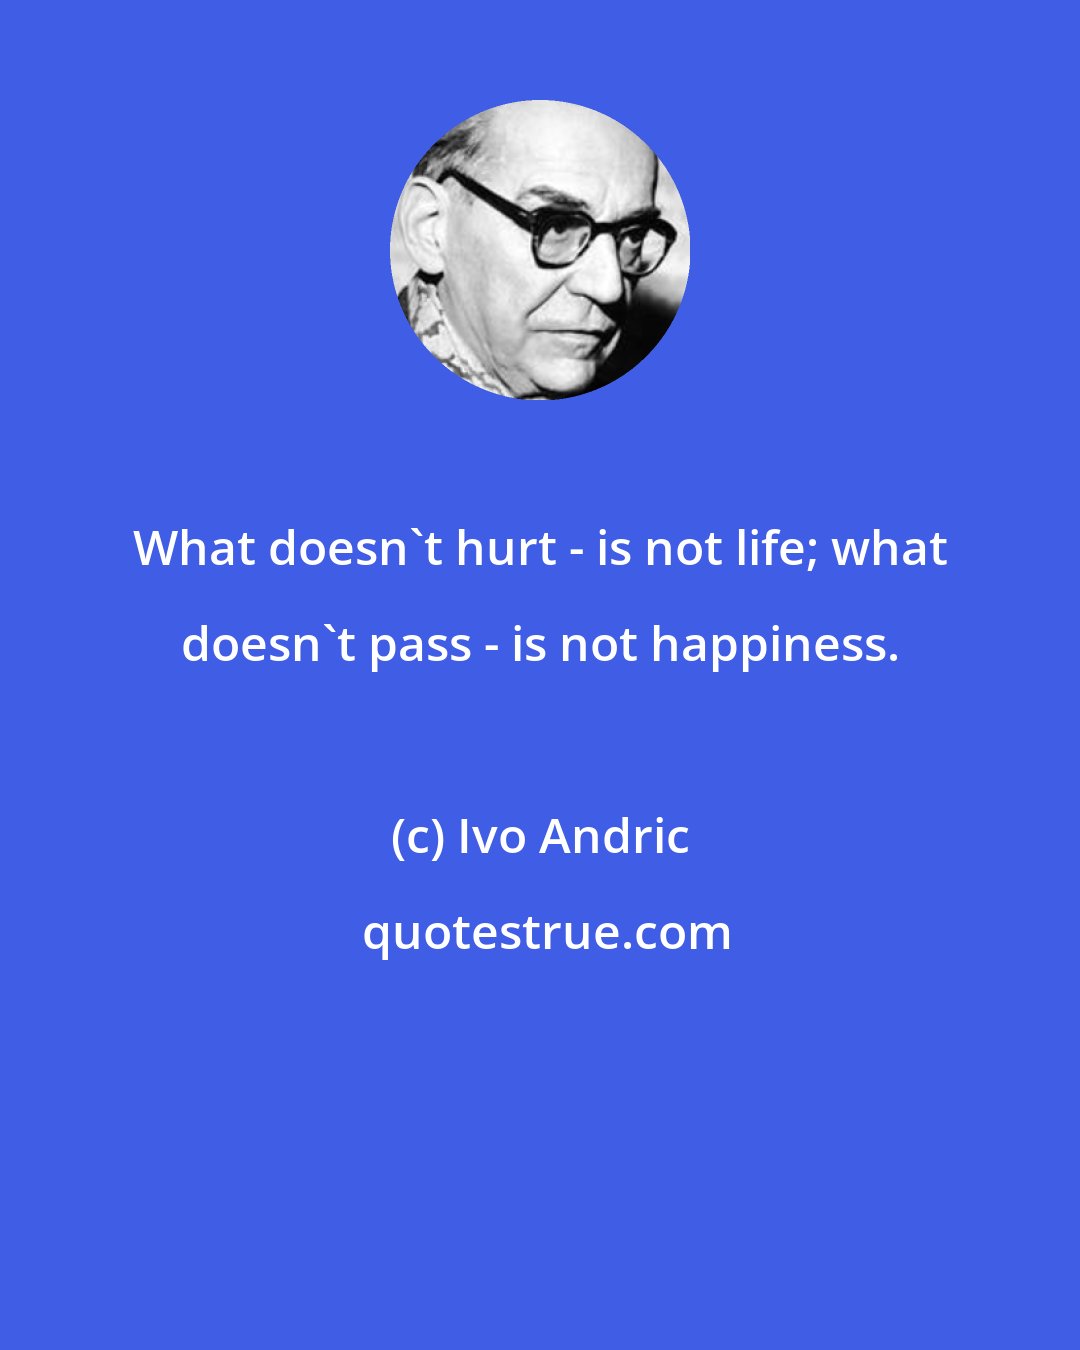 Ivo Andric: What doesn't hurt - is not life; what doesn't pass - is not happiness.